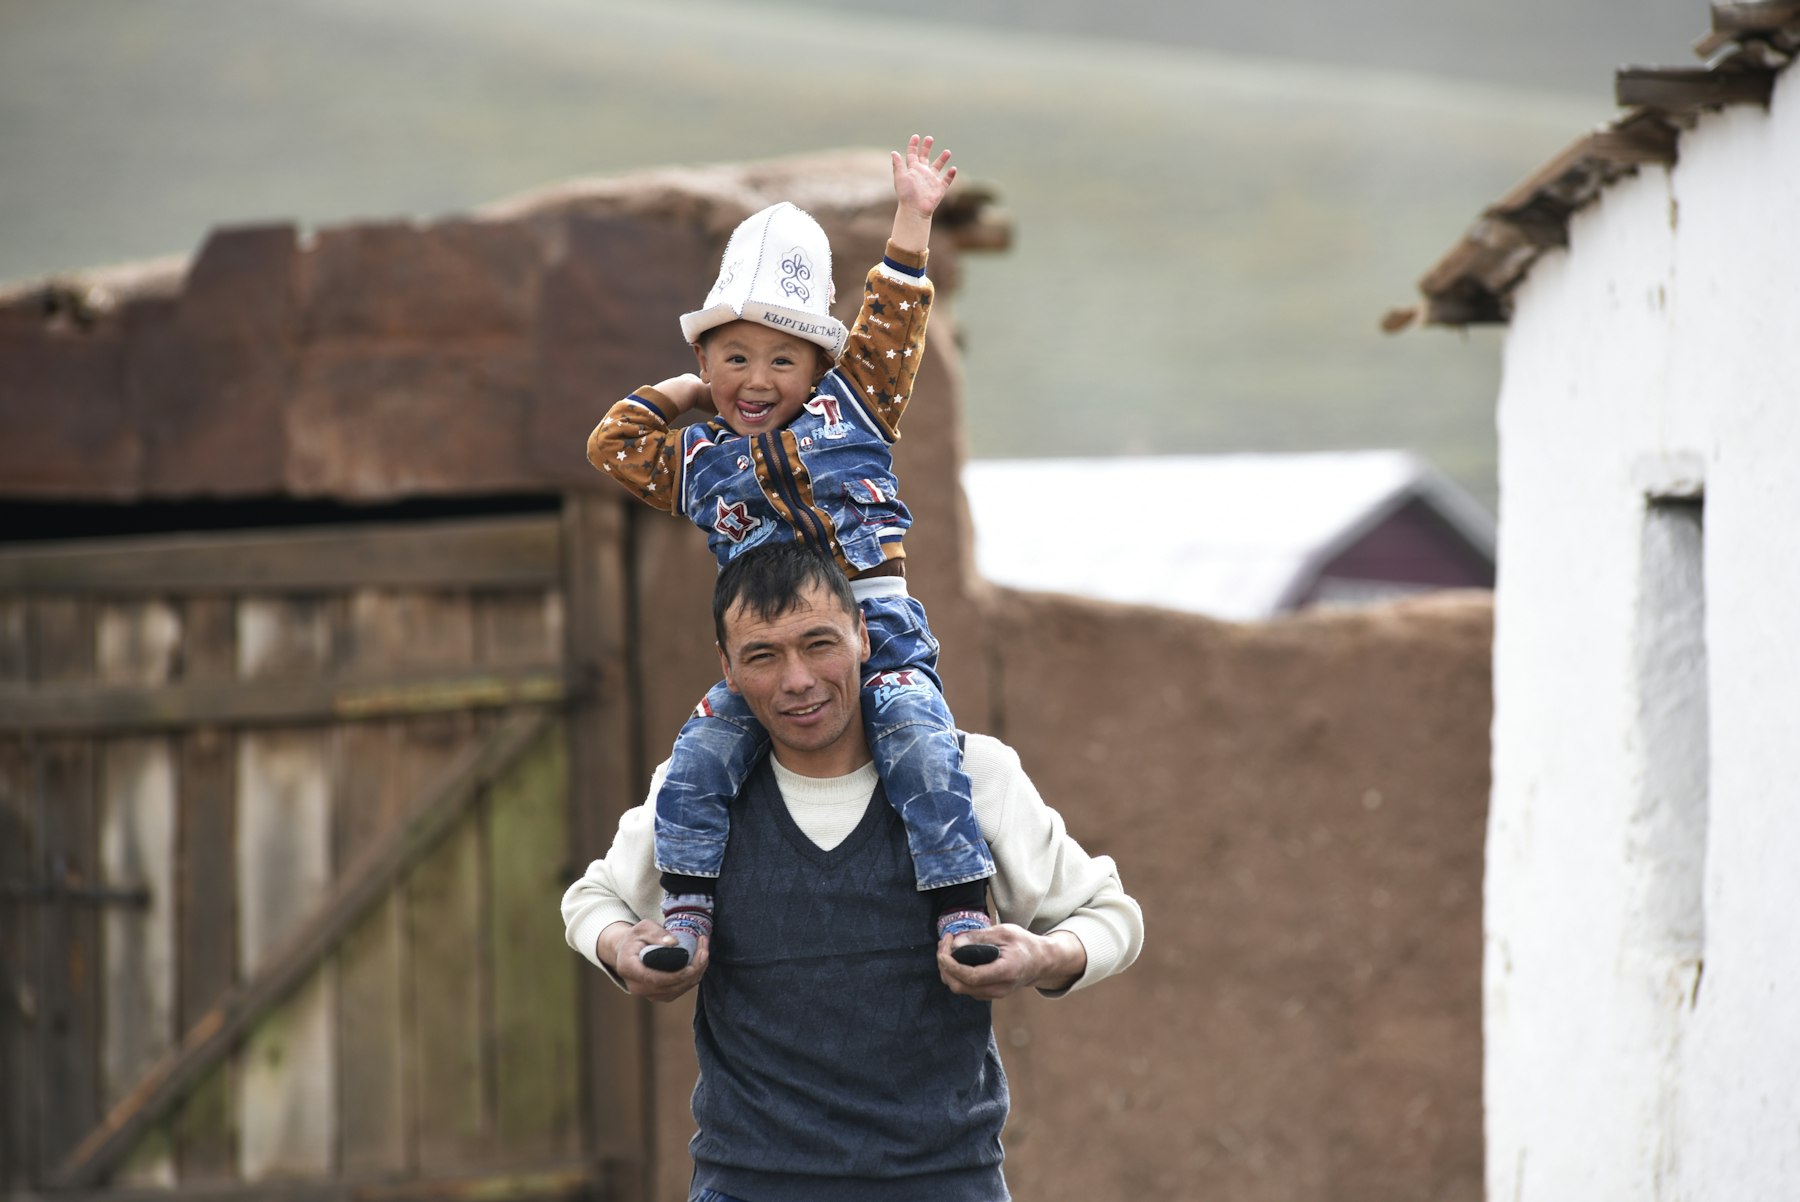 In places like Kyrgyzstan, gender inequality often inhibits men from building emotional bonds with their families as they are expected to be the sole breadwinner.